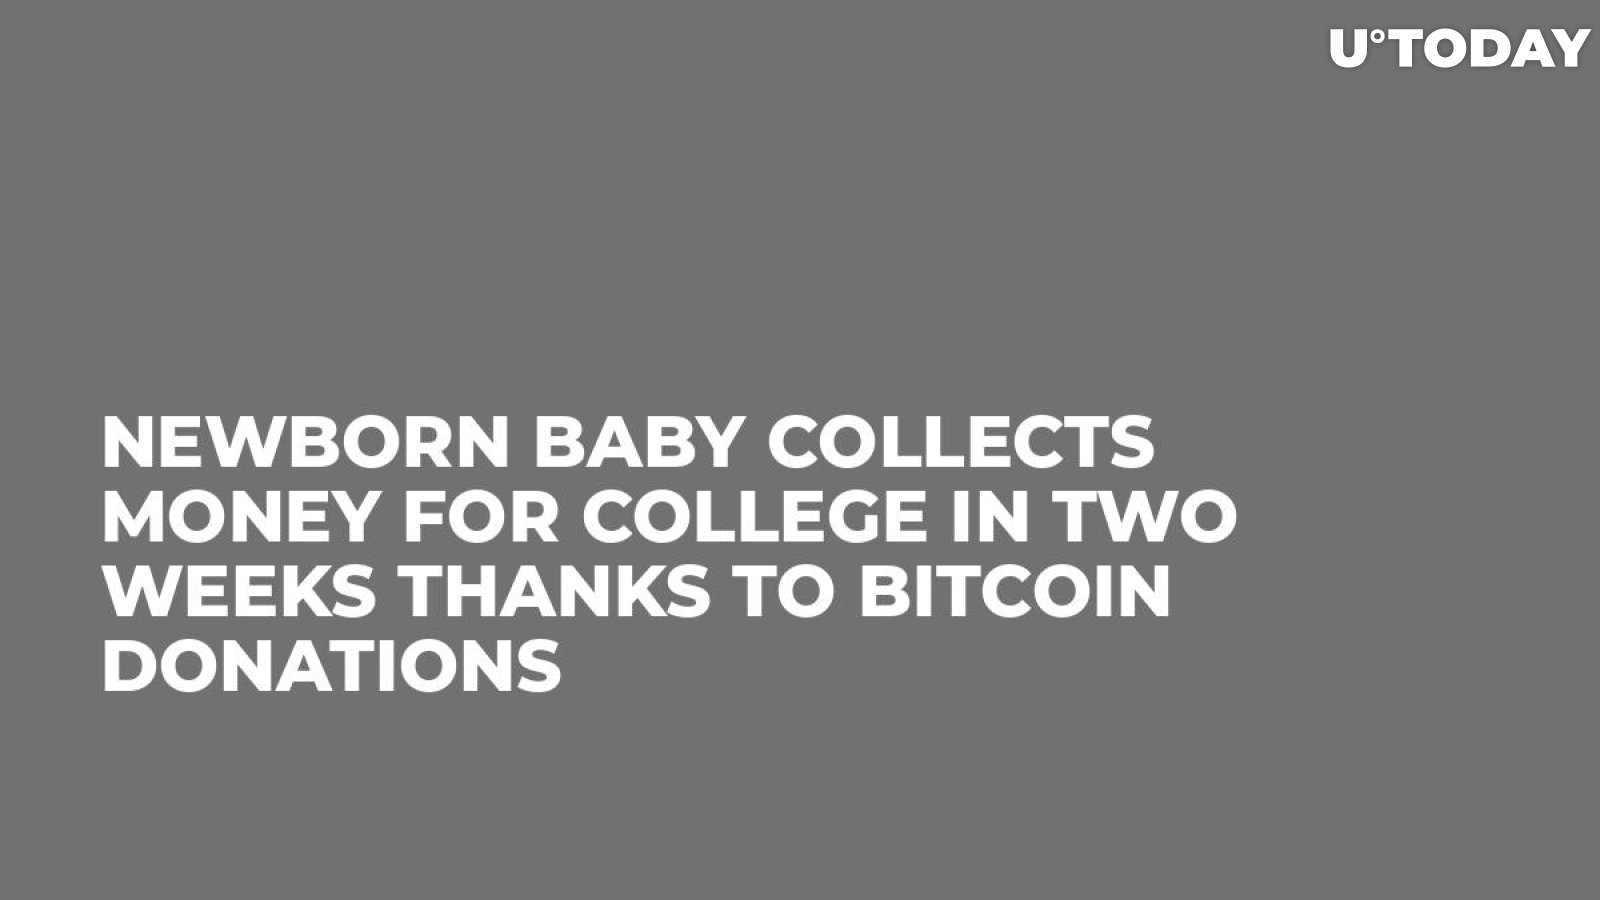 Newborn Baby Collects Money for College in Two Weeks Thanks to Bitcoin Donations